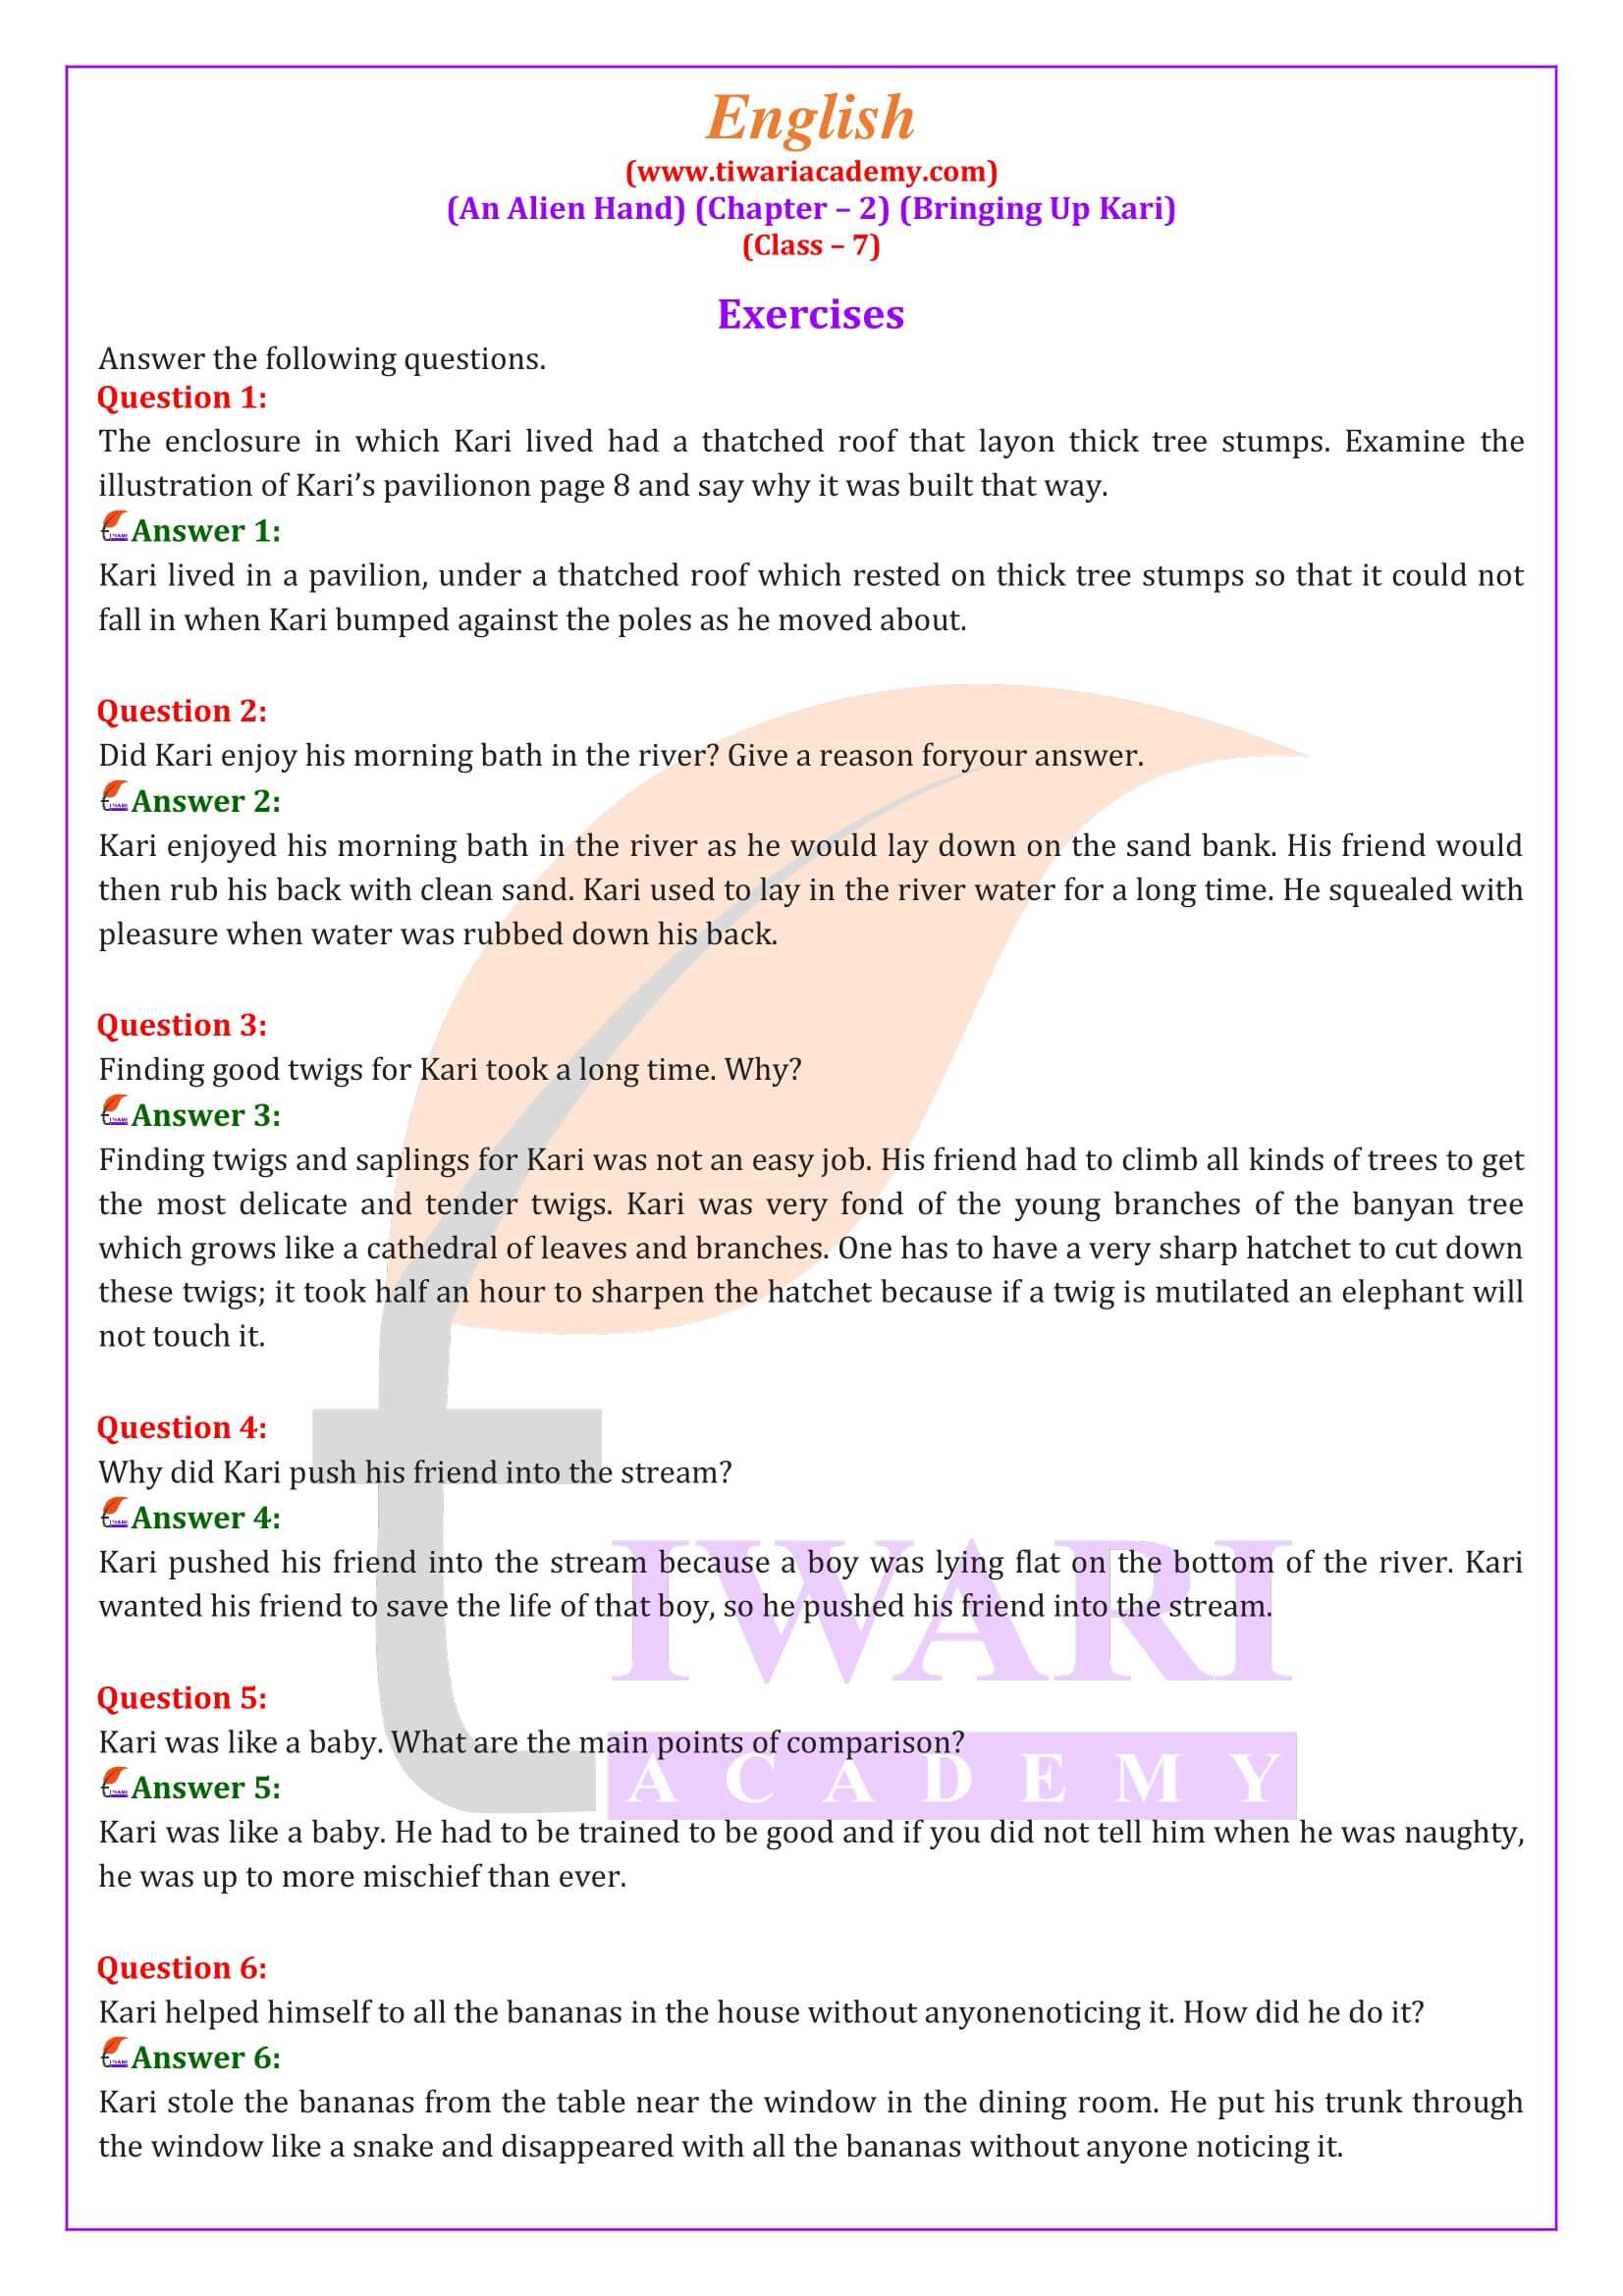 NCERT Solutions for Class 7 English an Alien Hand Chapter 2 Bringing up Kari